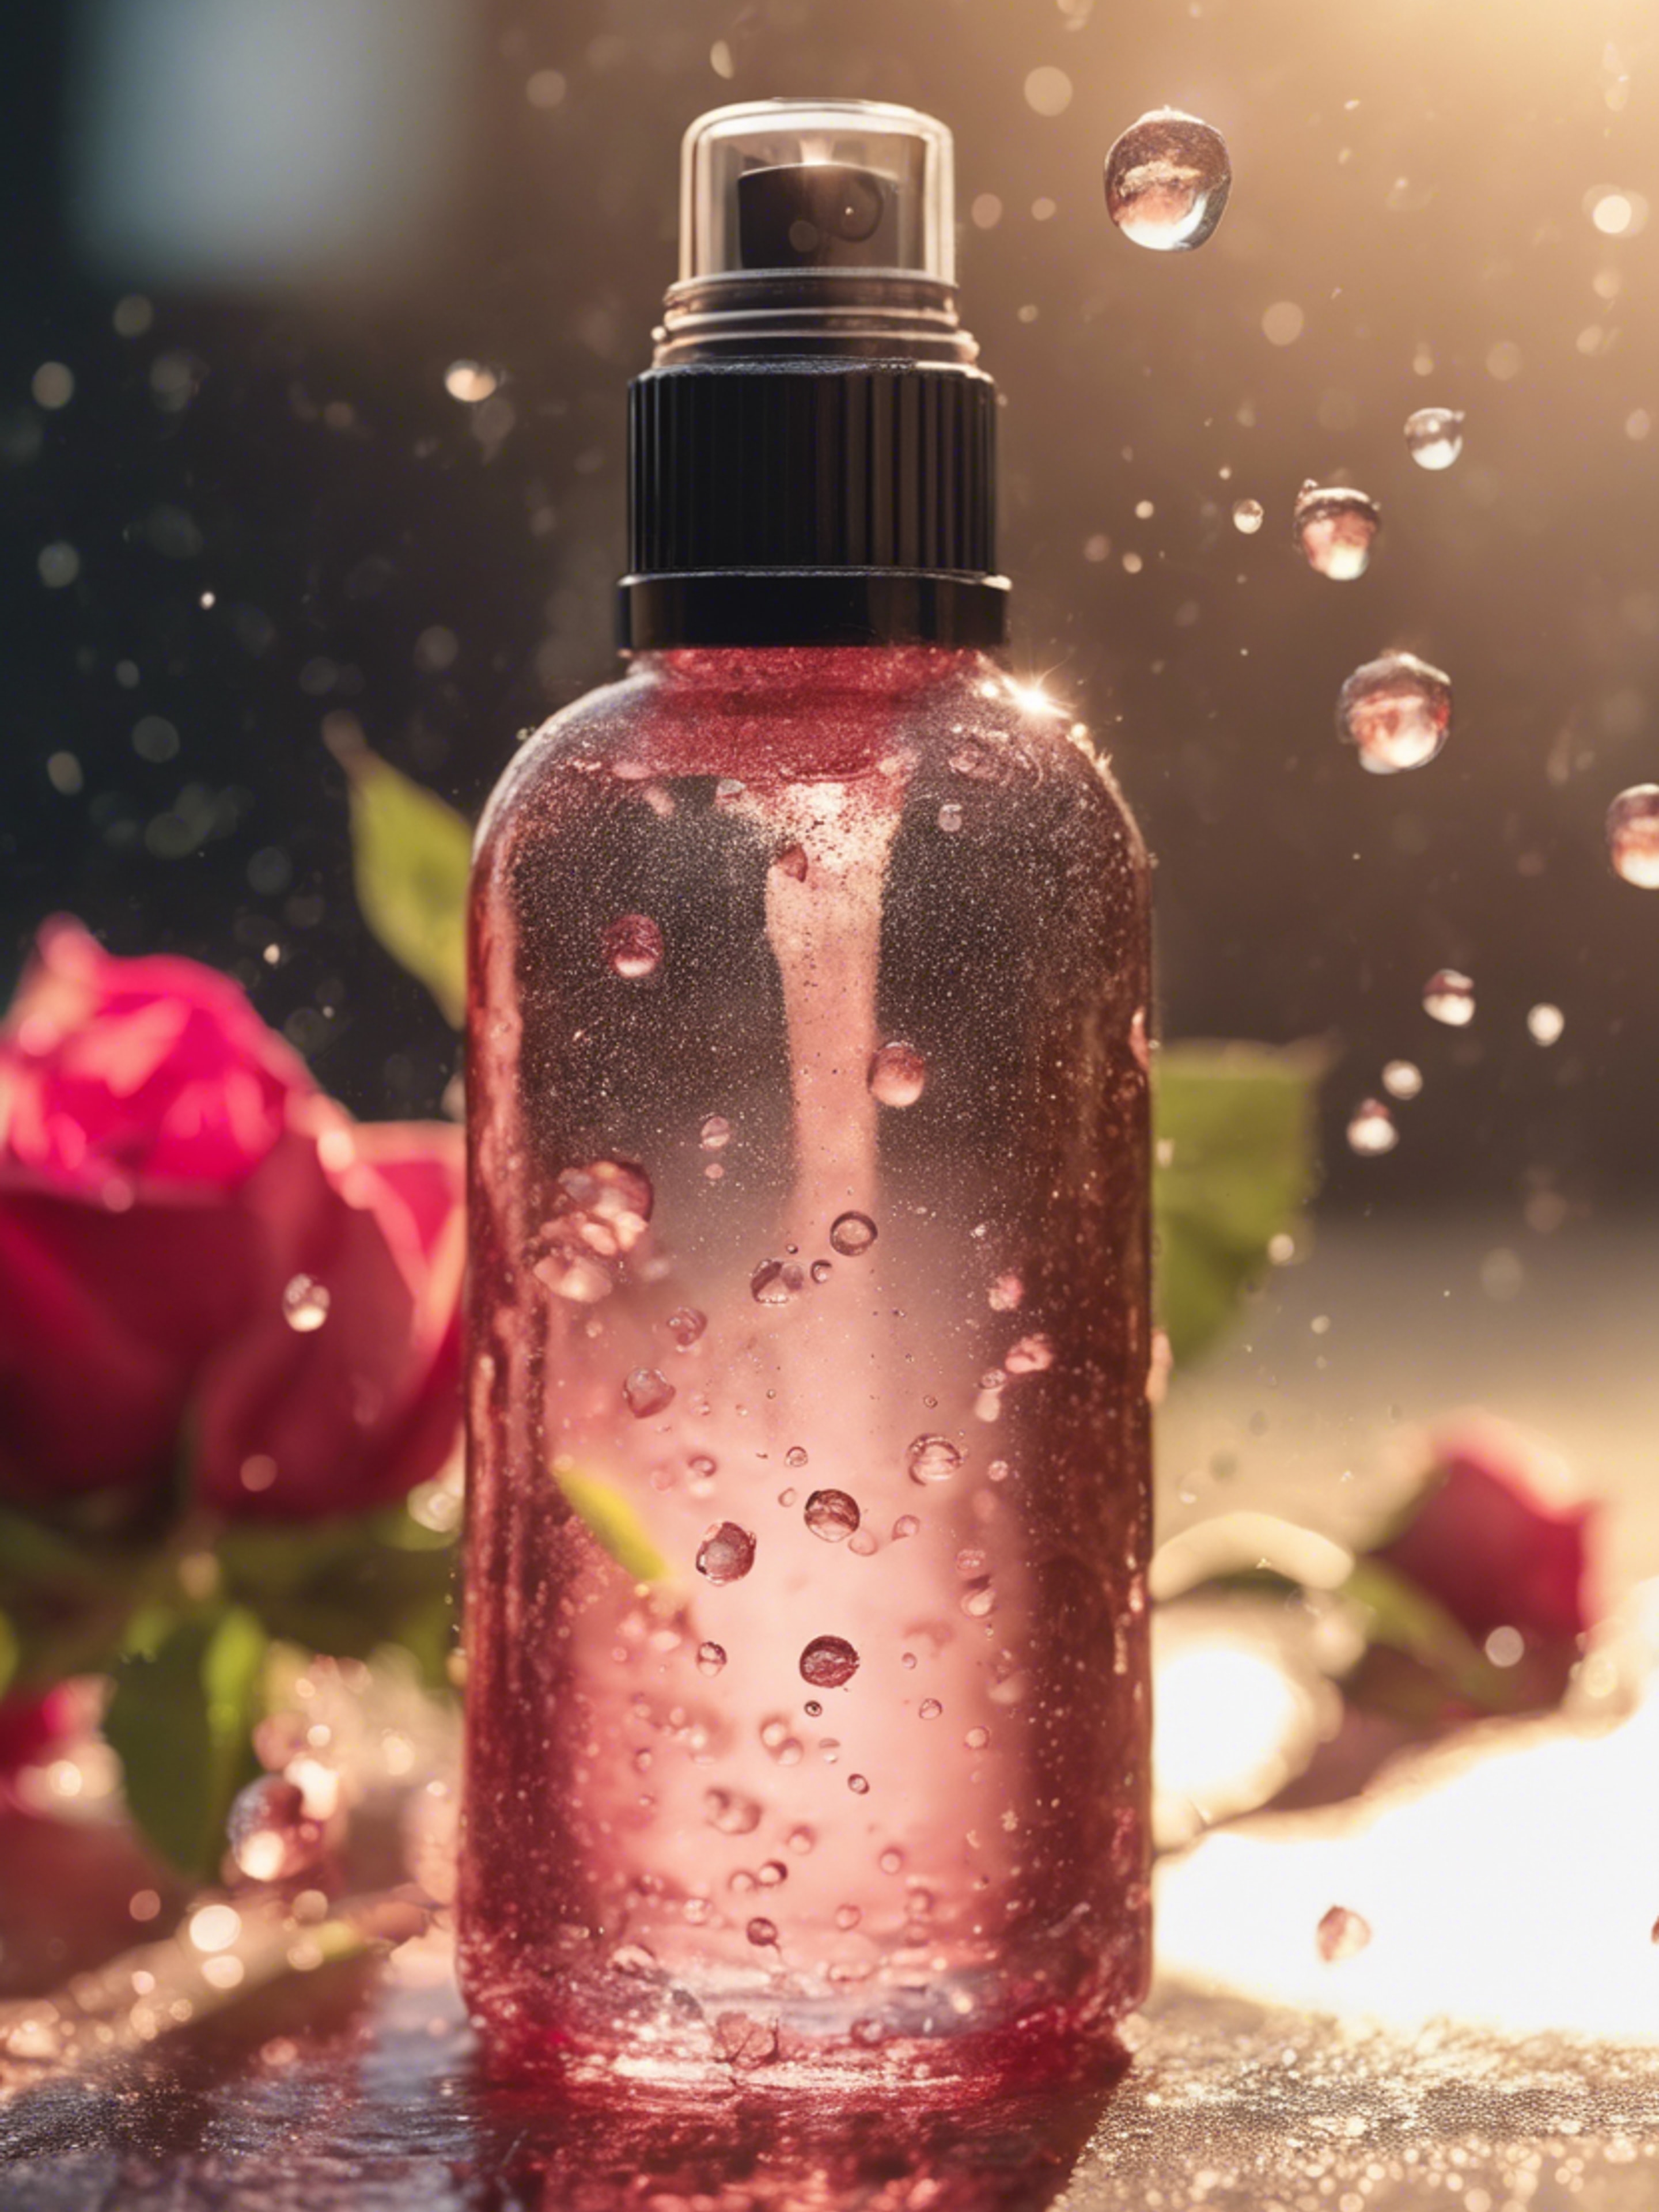 A refreshing spray bottle of rose water toner sprinkling droplets in the sunlight. کاغذ دیواری[f1b2cb92d7c7439692a8]